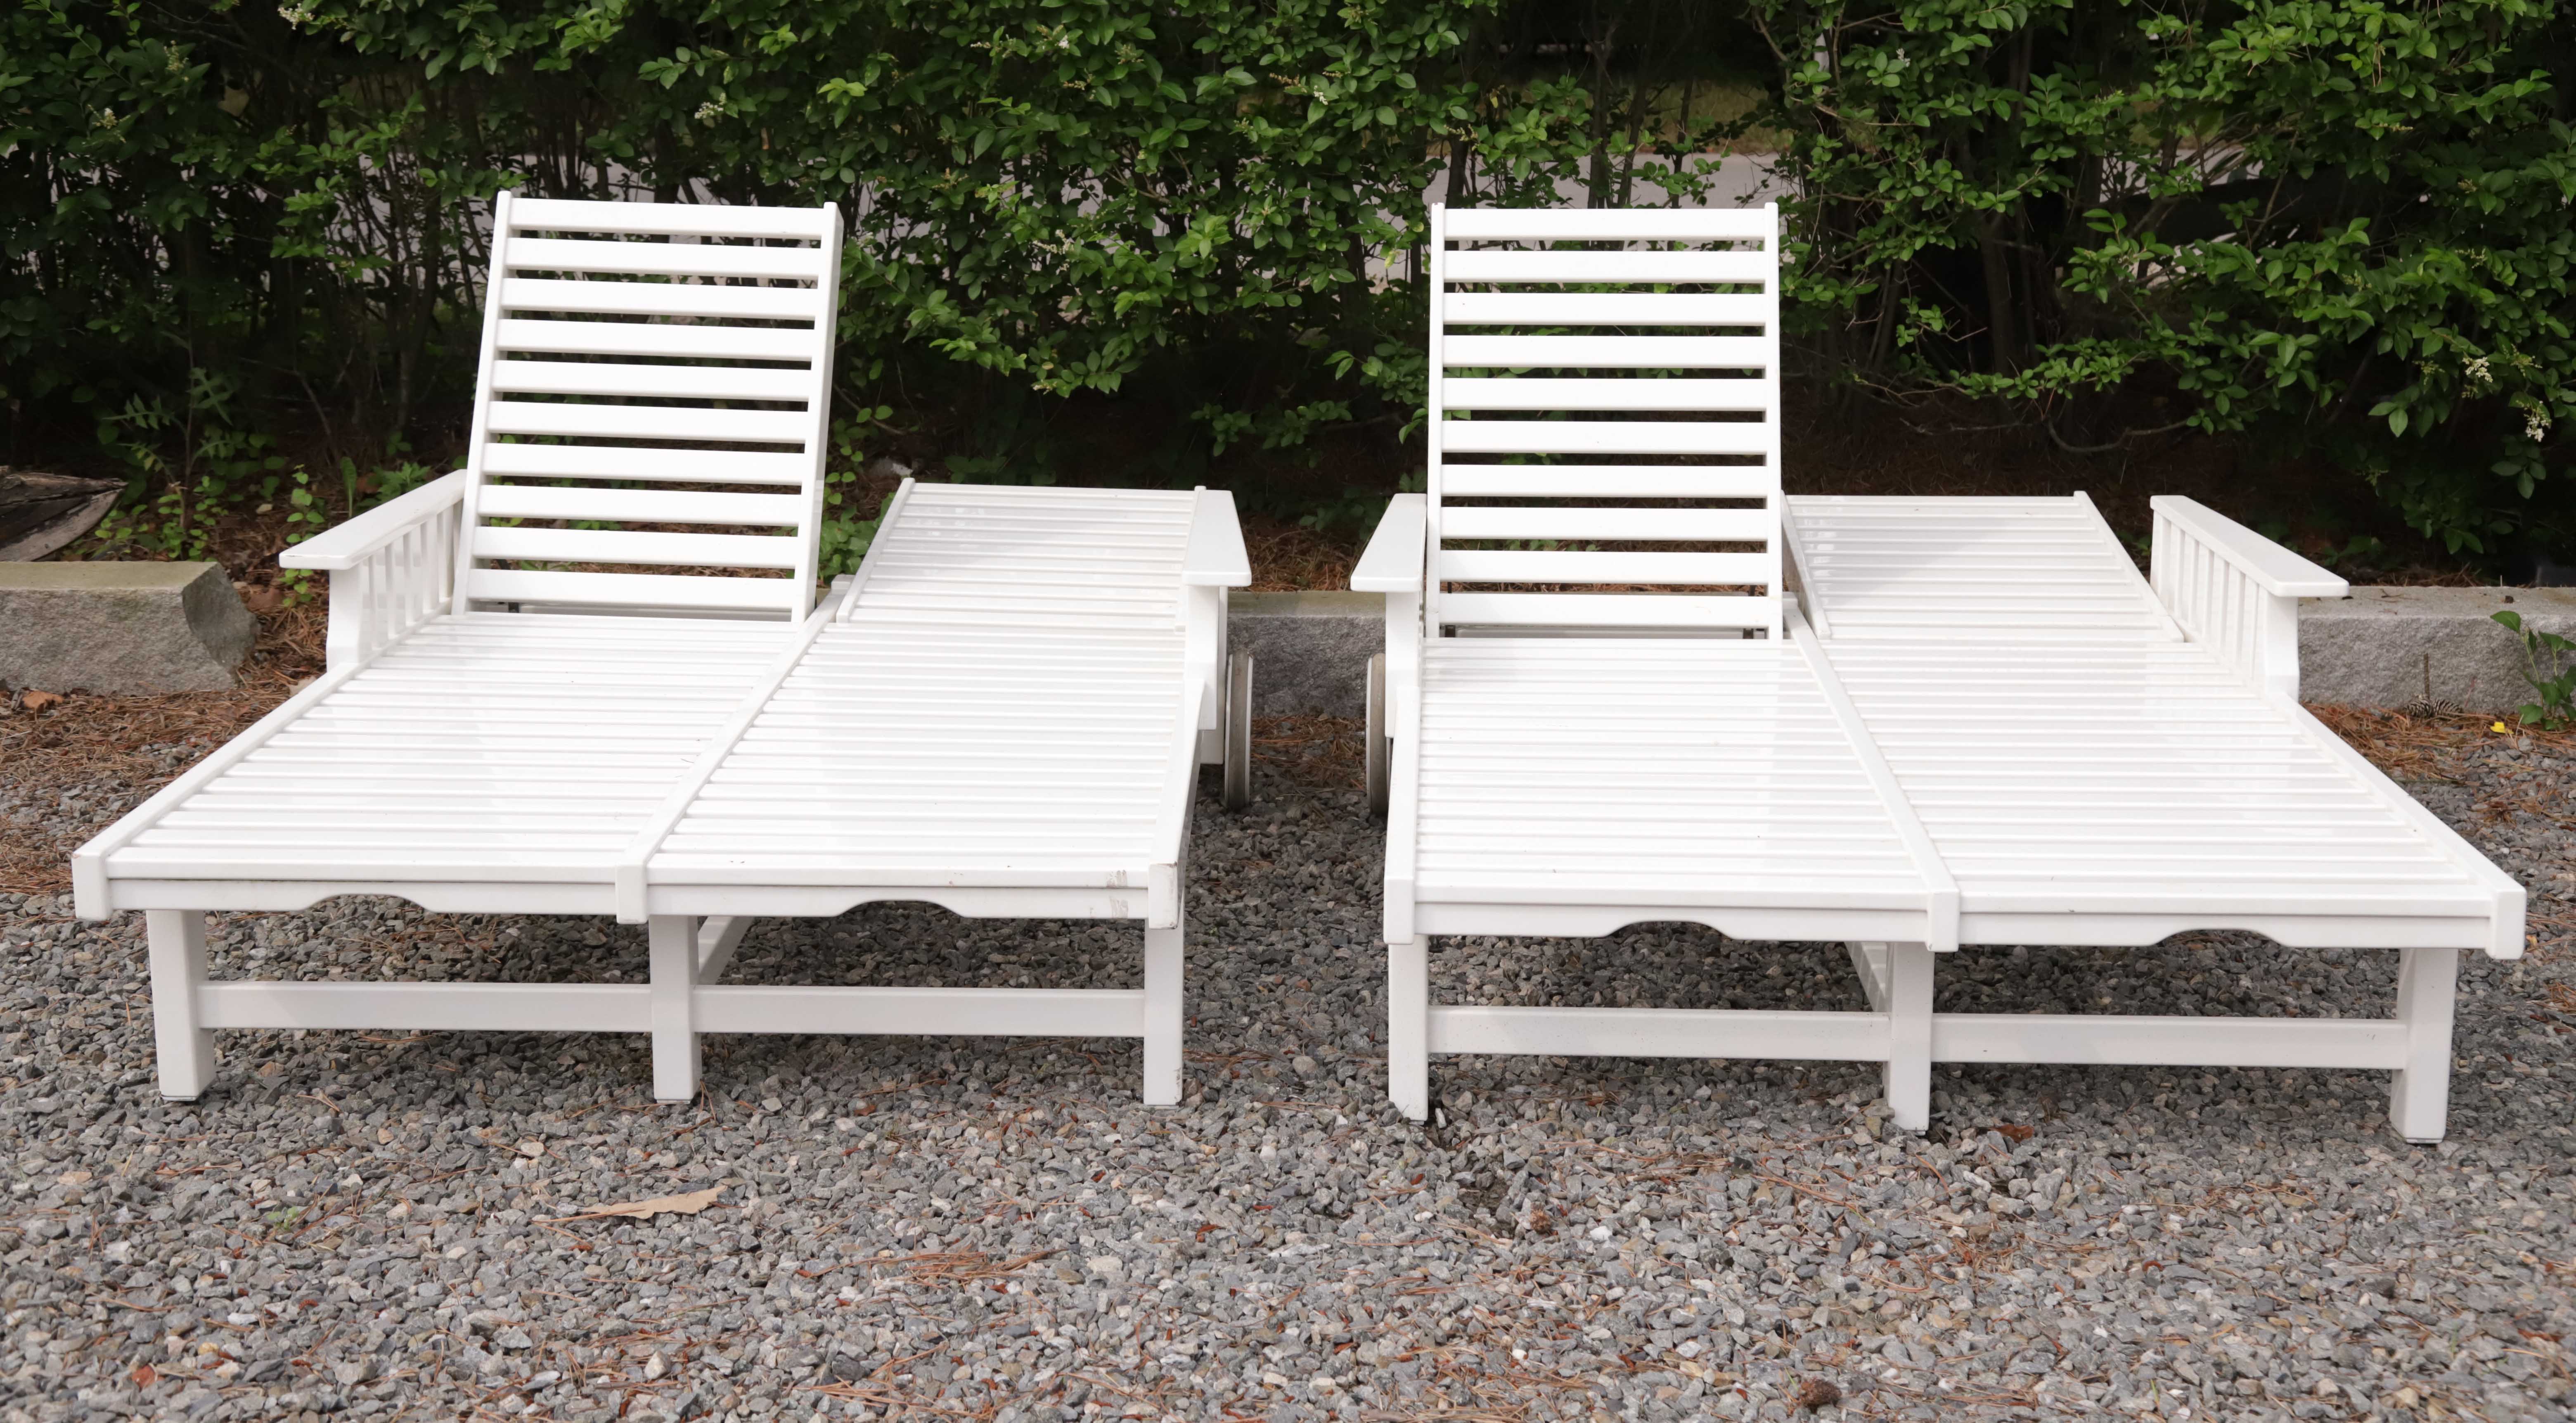 Pair of Weatherend Southern Harbor Double Chaise Lounges